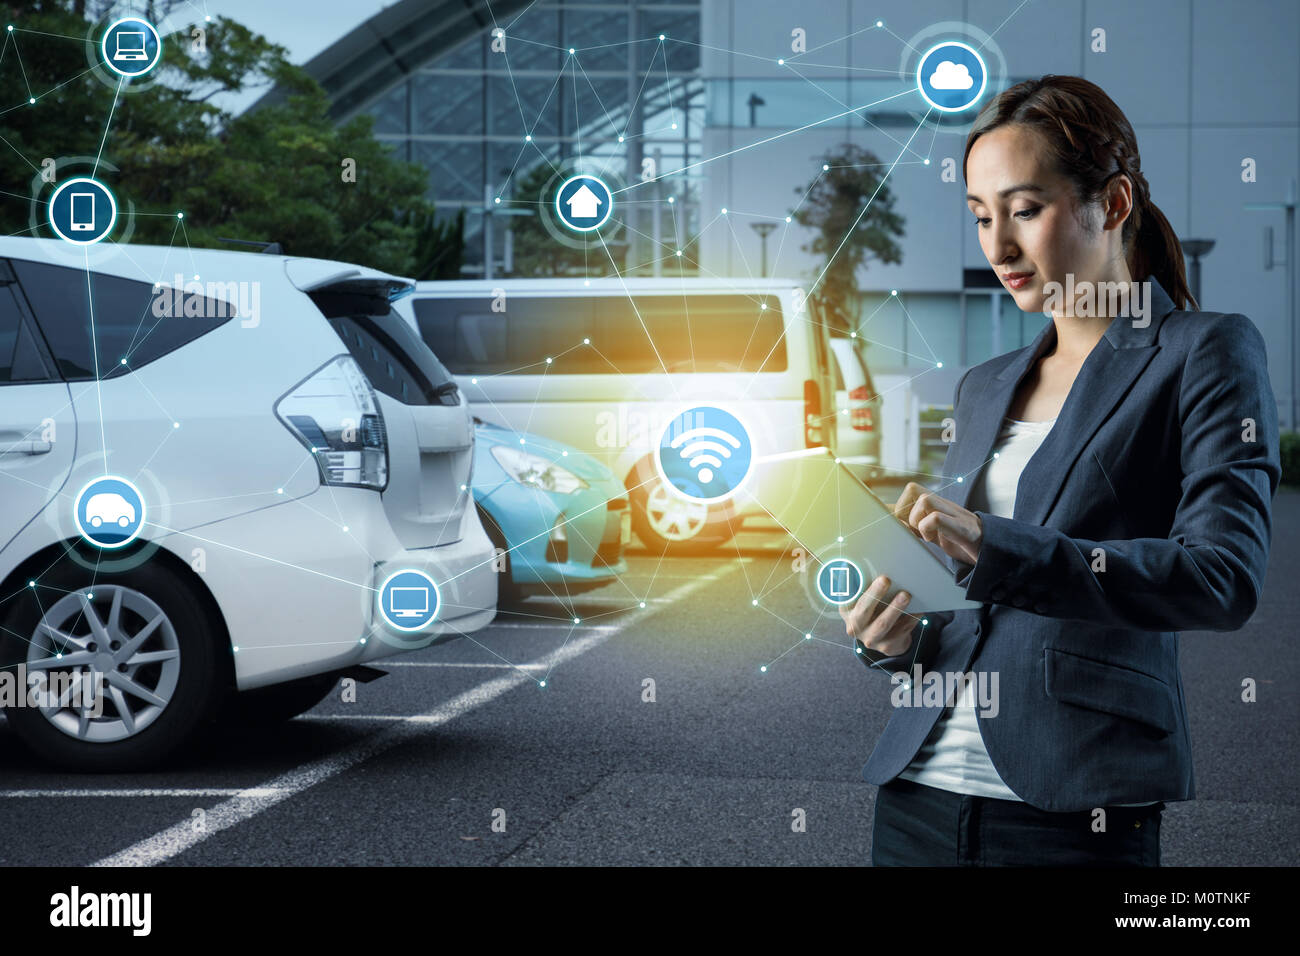 Internet of Things and futuristic transportation concept. Stock Photo